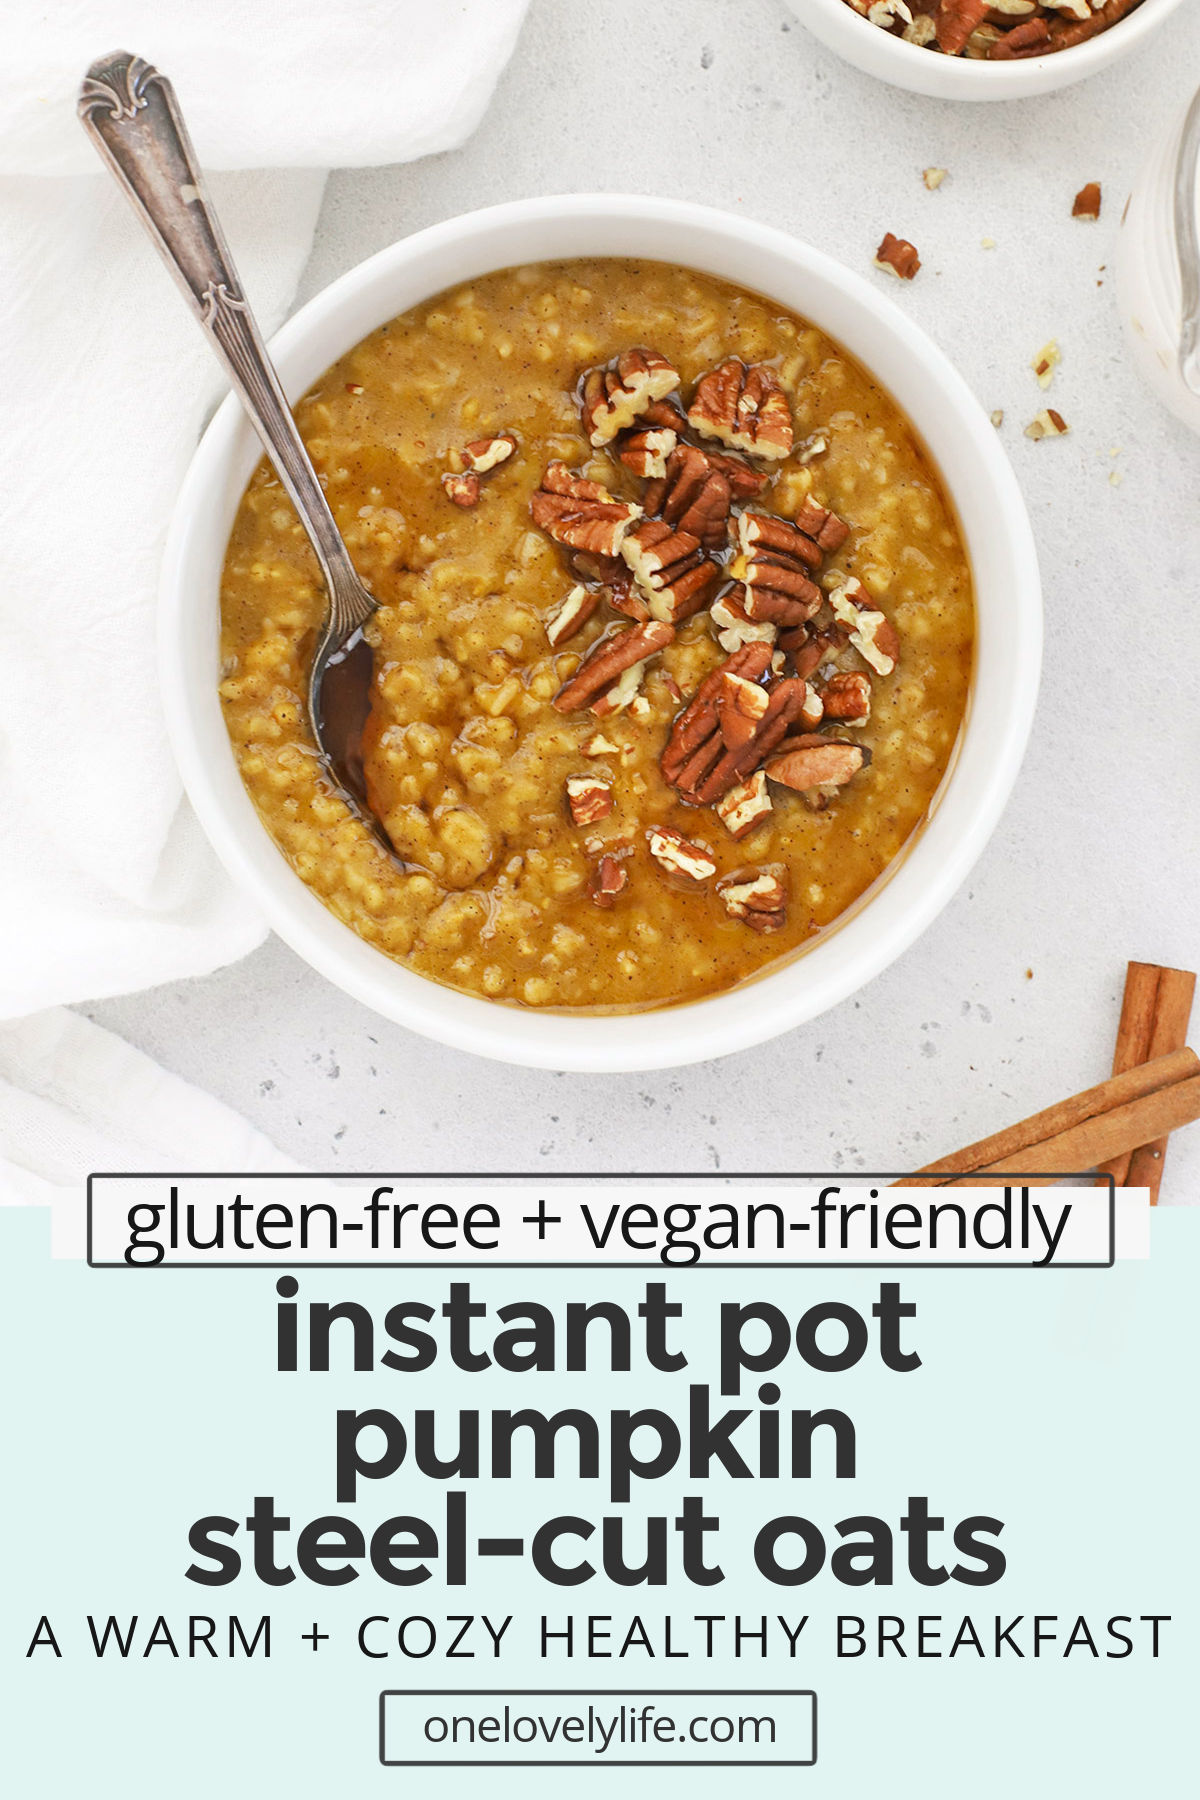 Instant Pot Pumpkin Steel-Cut Oats - This creamy pumpkin steel-cut oatmeal is so easy to make in the Instant Pot. It's a delicious warm breakfast that's worth waking up for any day of the week. (Gluten-Free, Vegan-Friendly) // Pumpkin Oatmeal // Pumpkin Steel Cut Oats // Instant Pot Pumpkin Oatmeal // Fall breakfast // Winter breakfast // healthy breakfast #steelcutoats #oatmeal #instantpot #fallrecipe #pumpkin #healthypumpkinrecipes #veganbreakfast #healthybreakfast